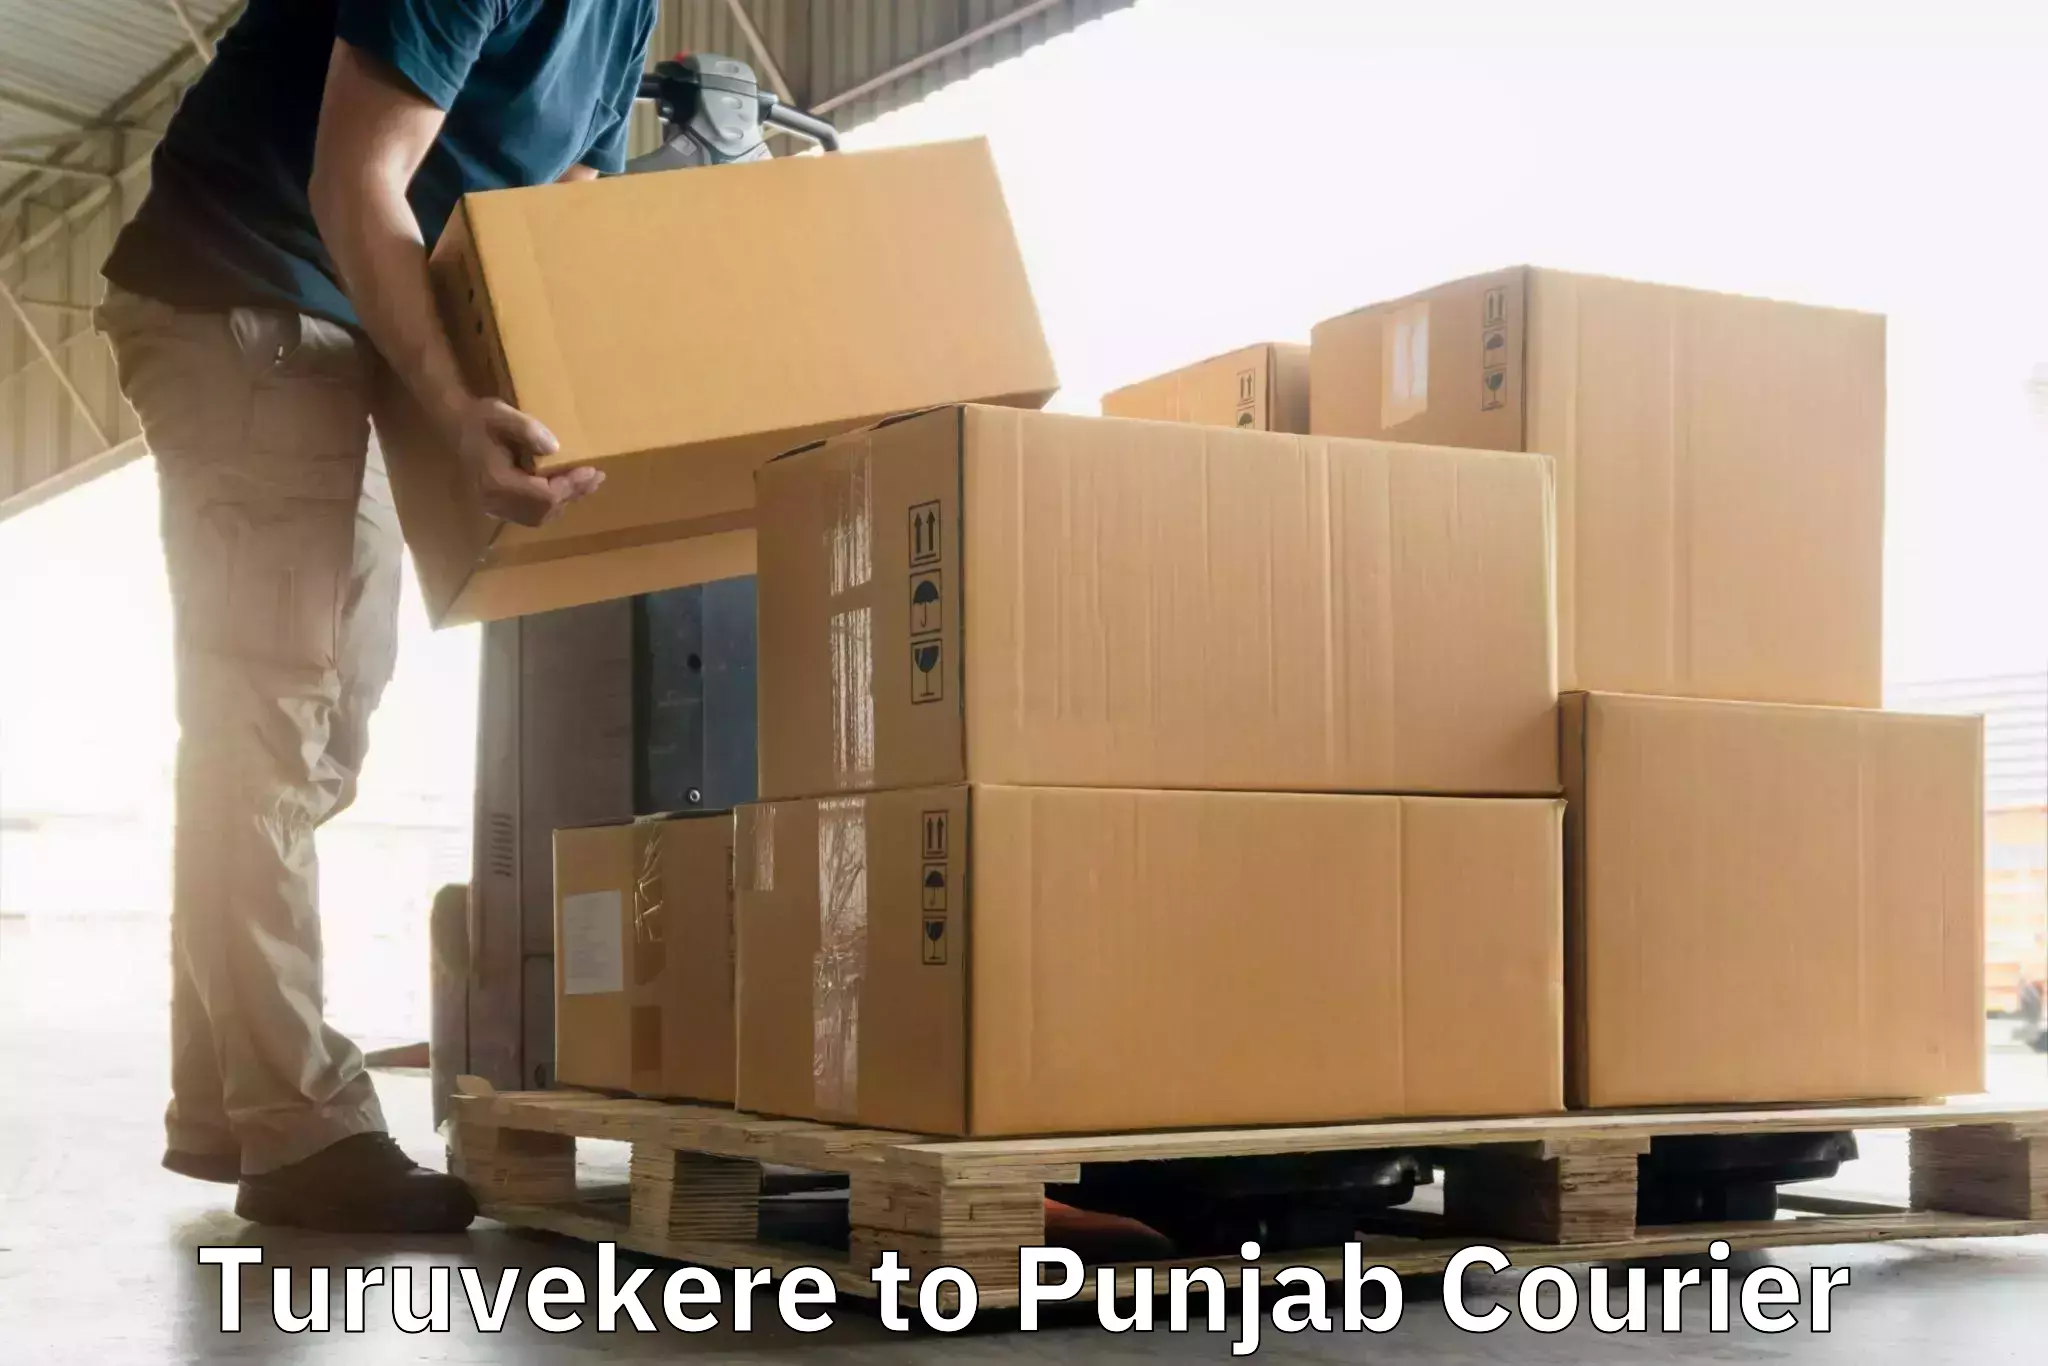 Courier service efficiency Turuvekere to Punjab